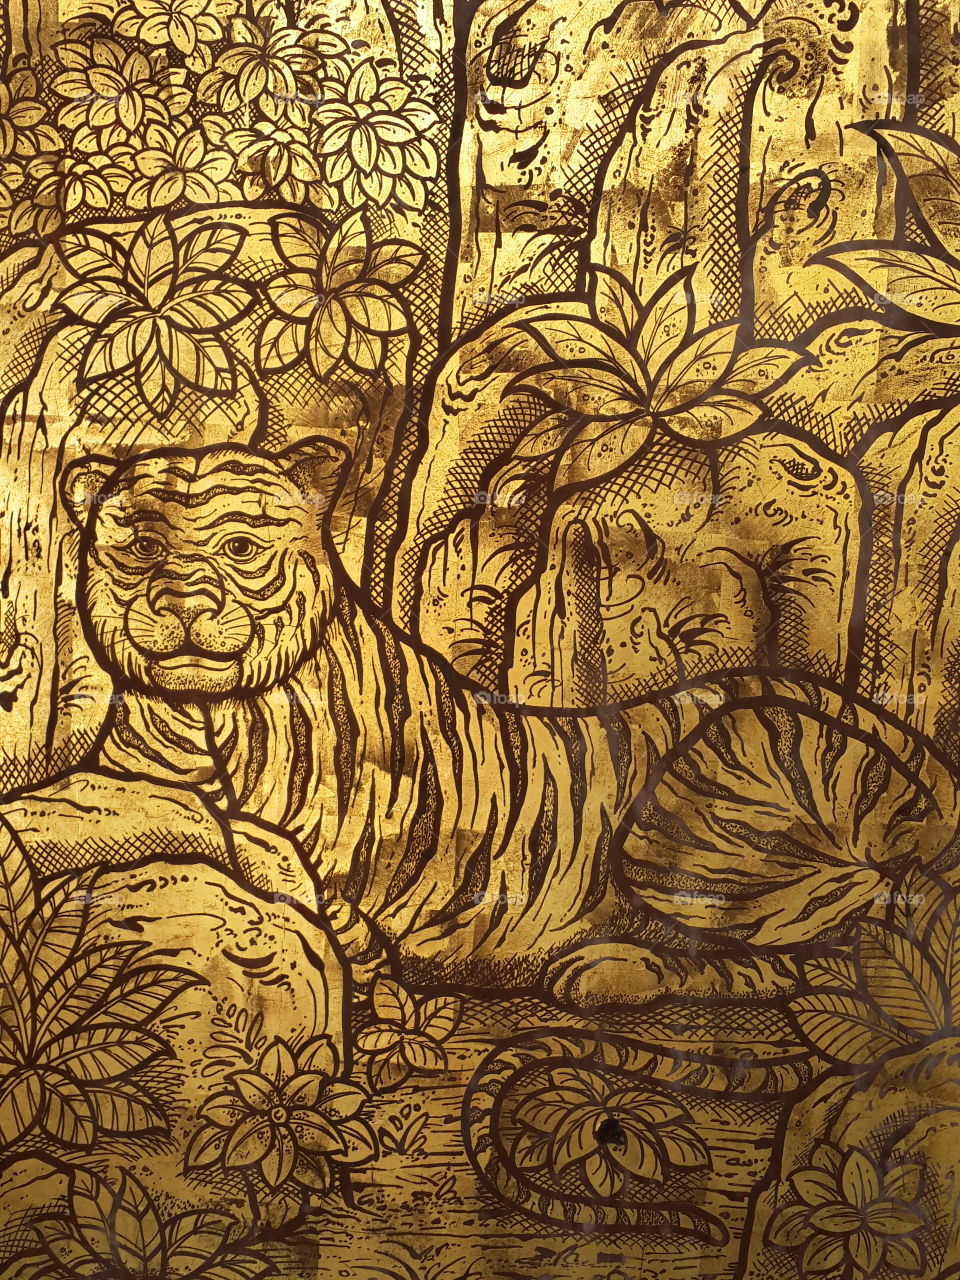 tiger thai traditional art in the wall